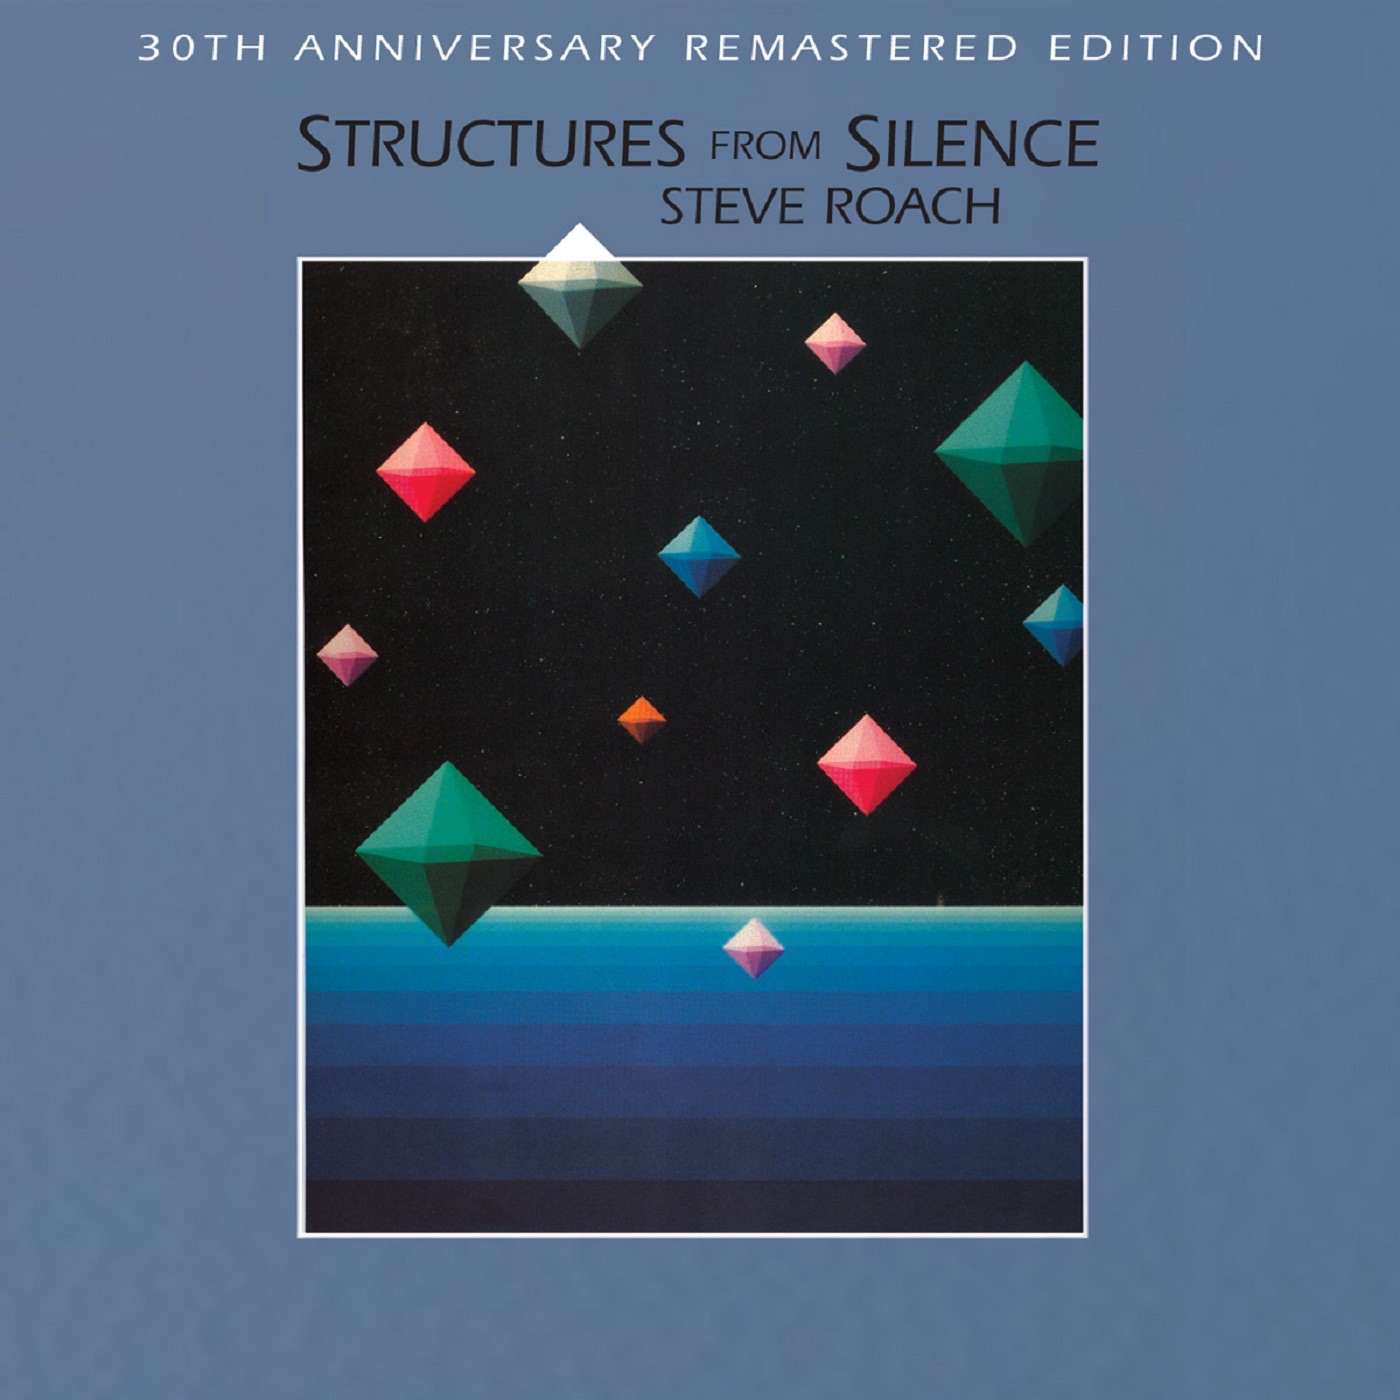 Structures From Silence by Steve Roach